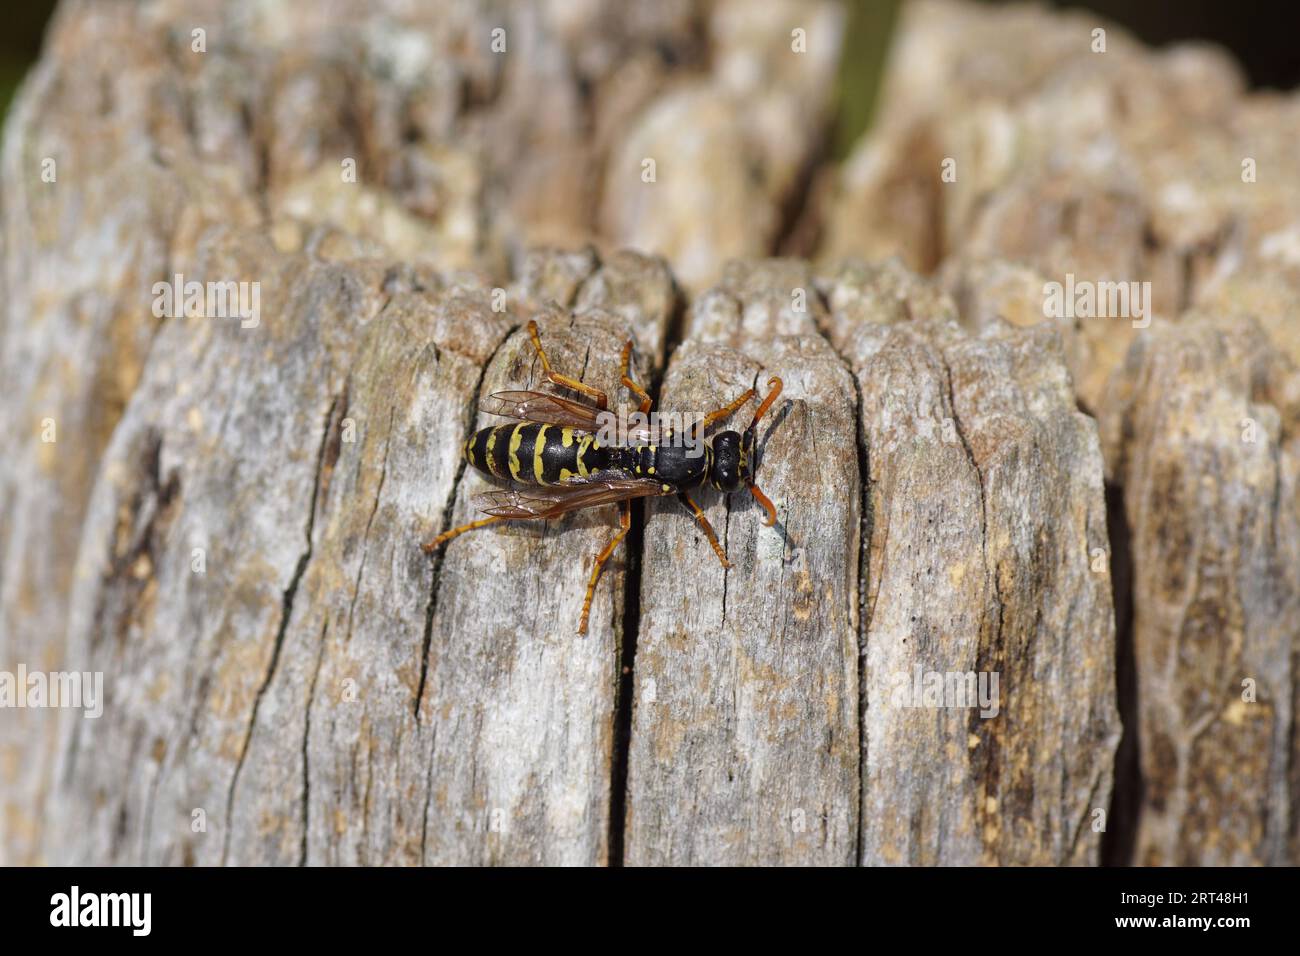 Closeup European paper wasp (Polistes dominula), subfamily Polistinae, family Vespidae. On a weathered wooden post. Late summer, September Netherlands Stock Photo